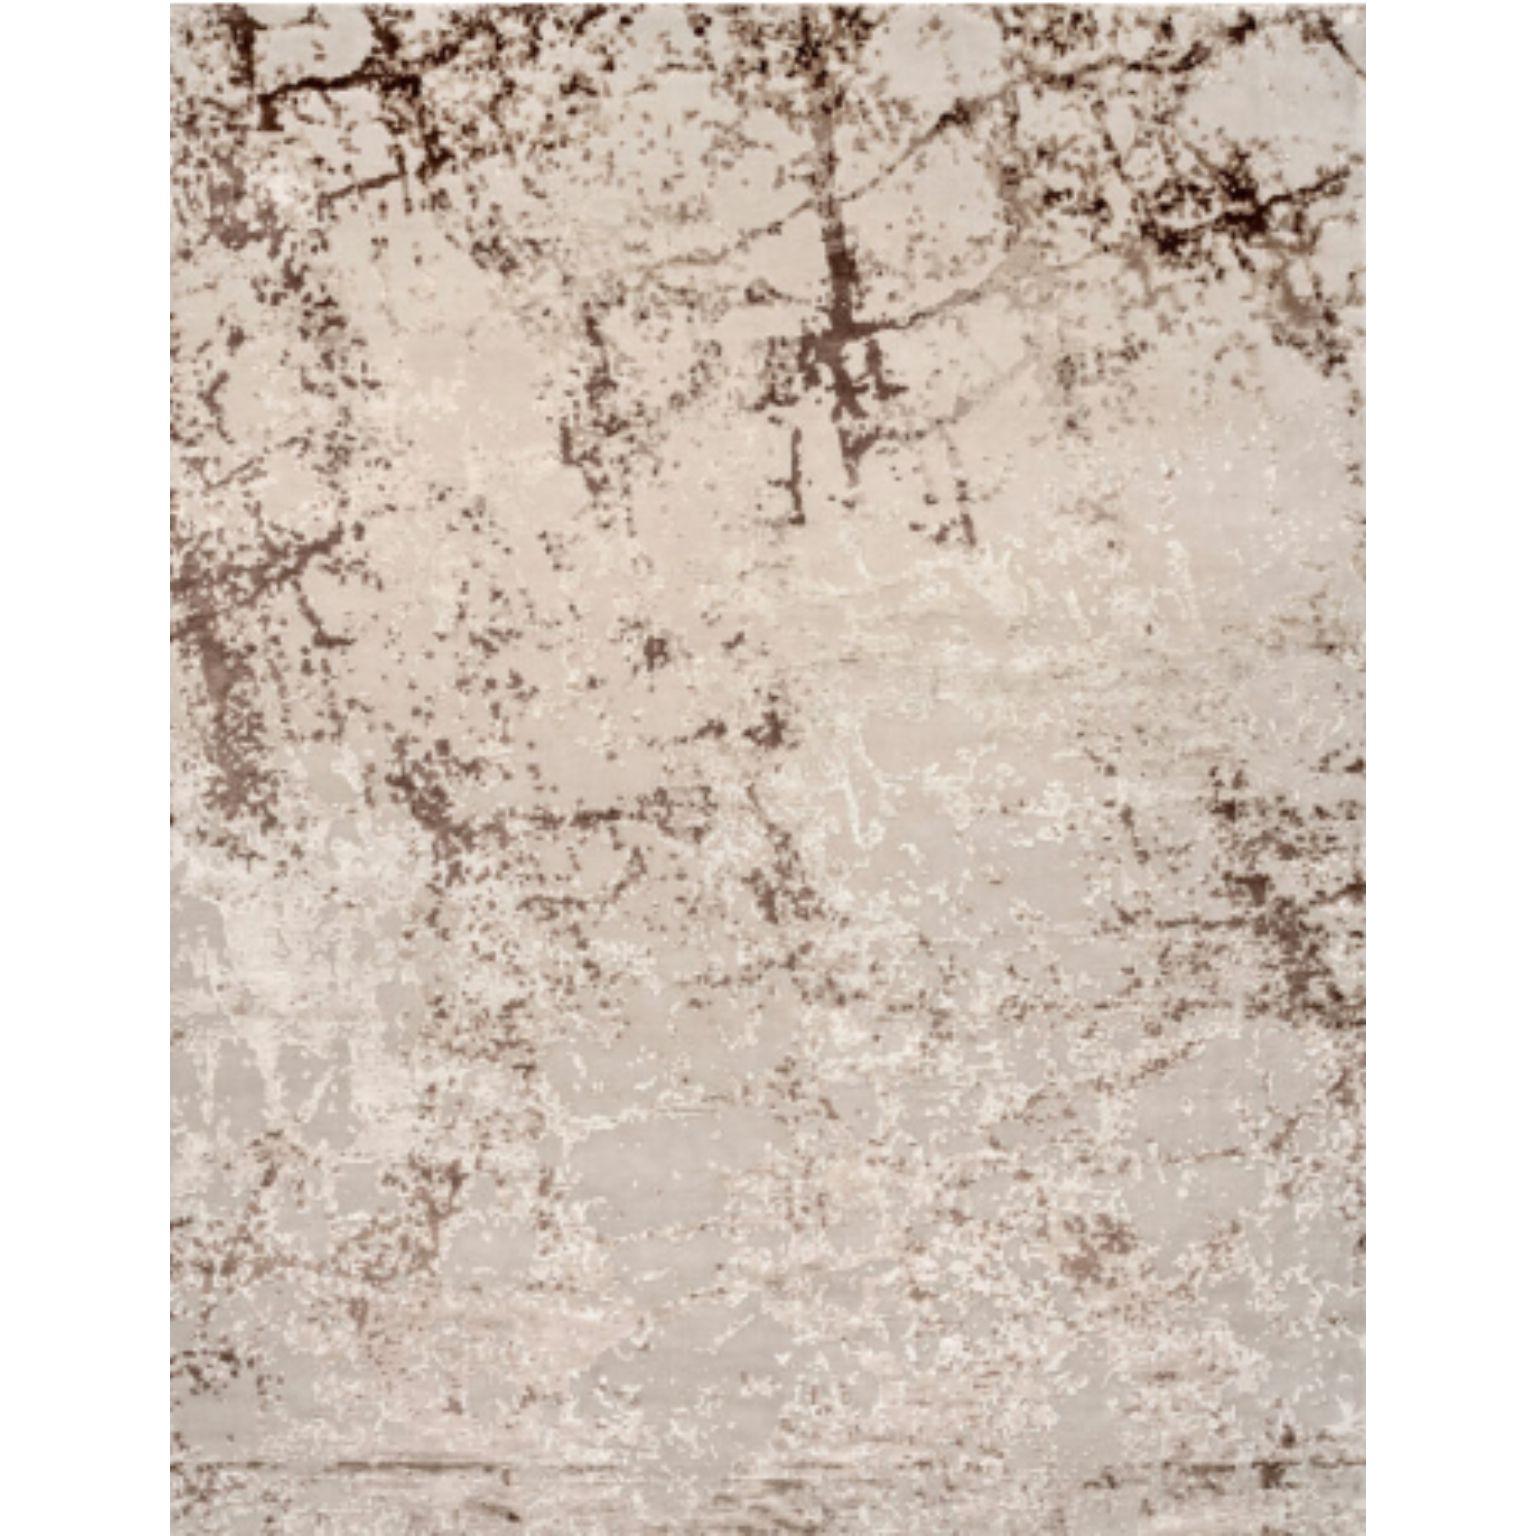 KINTSUGI 200 rug by Illulian
Dimensions: D300 x H200 cm 
Materials: Wool 50%, Silk 50%
Variations available and prices may vary according to materials and sizes. 

Illulian, historic and prestigious rug company brand, internationally renowned